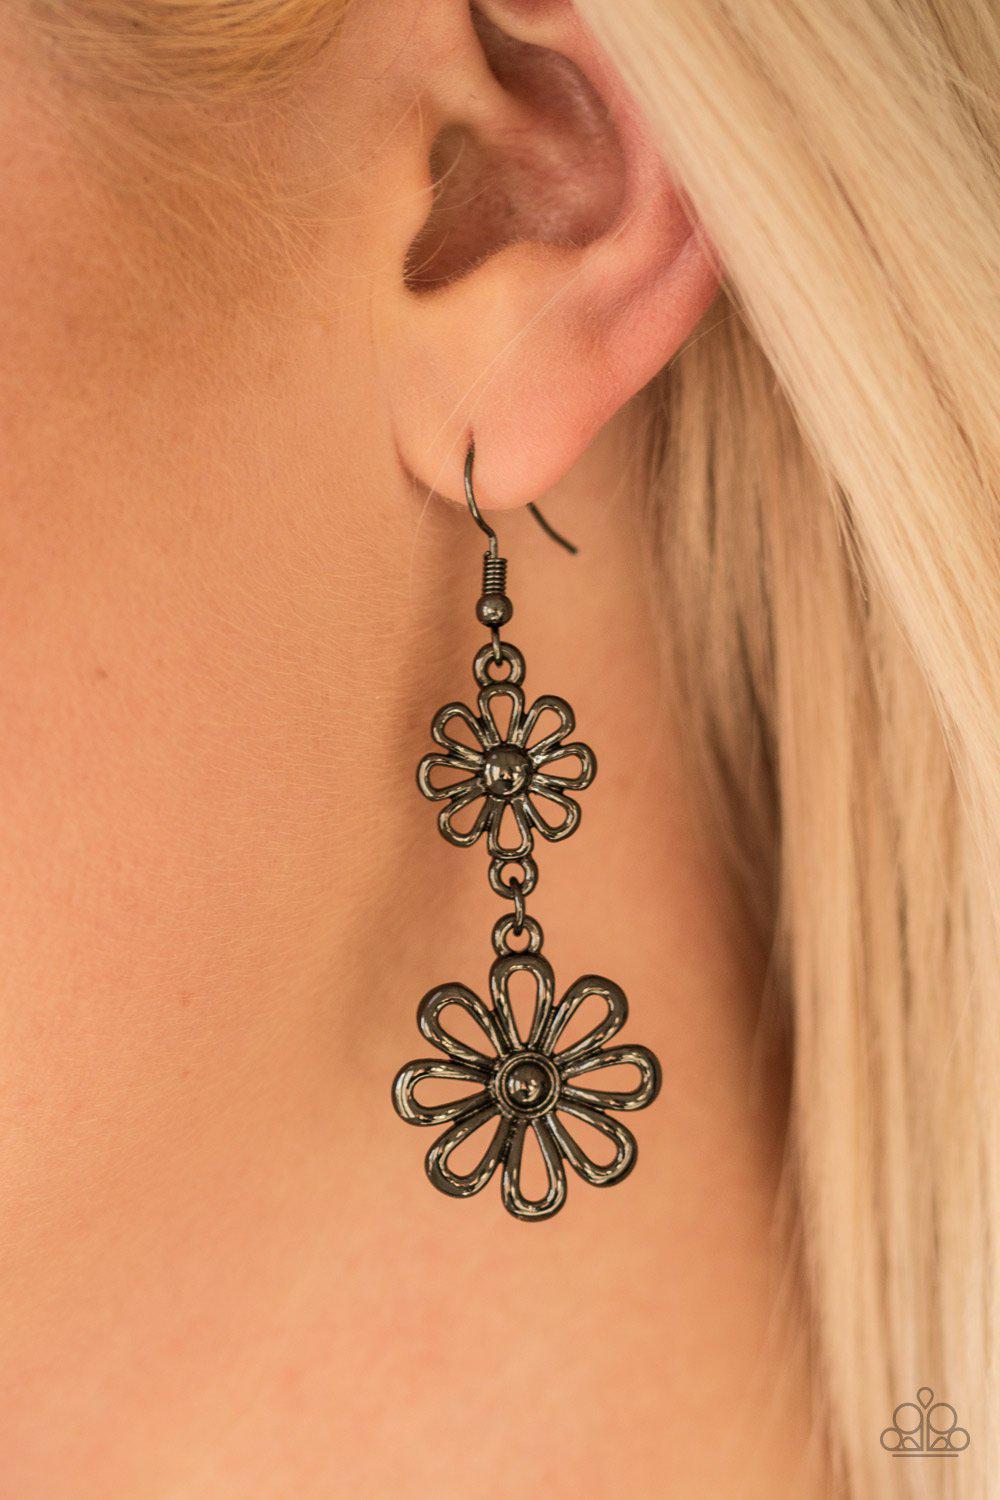 A Date With Daisies Gunmetal Black Flower Earrings - Paparazzi Accessories-CarasShop.com - $5 Jewelry by Cara Jewels